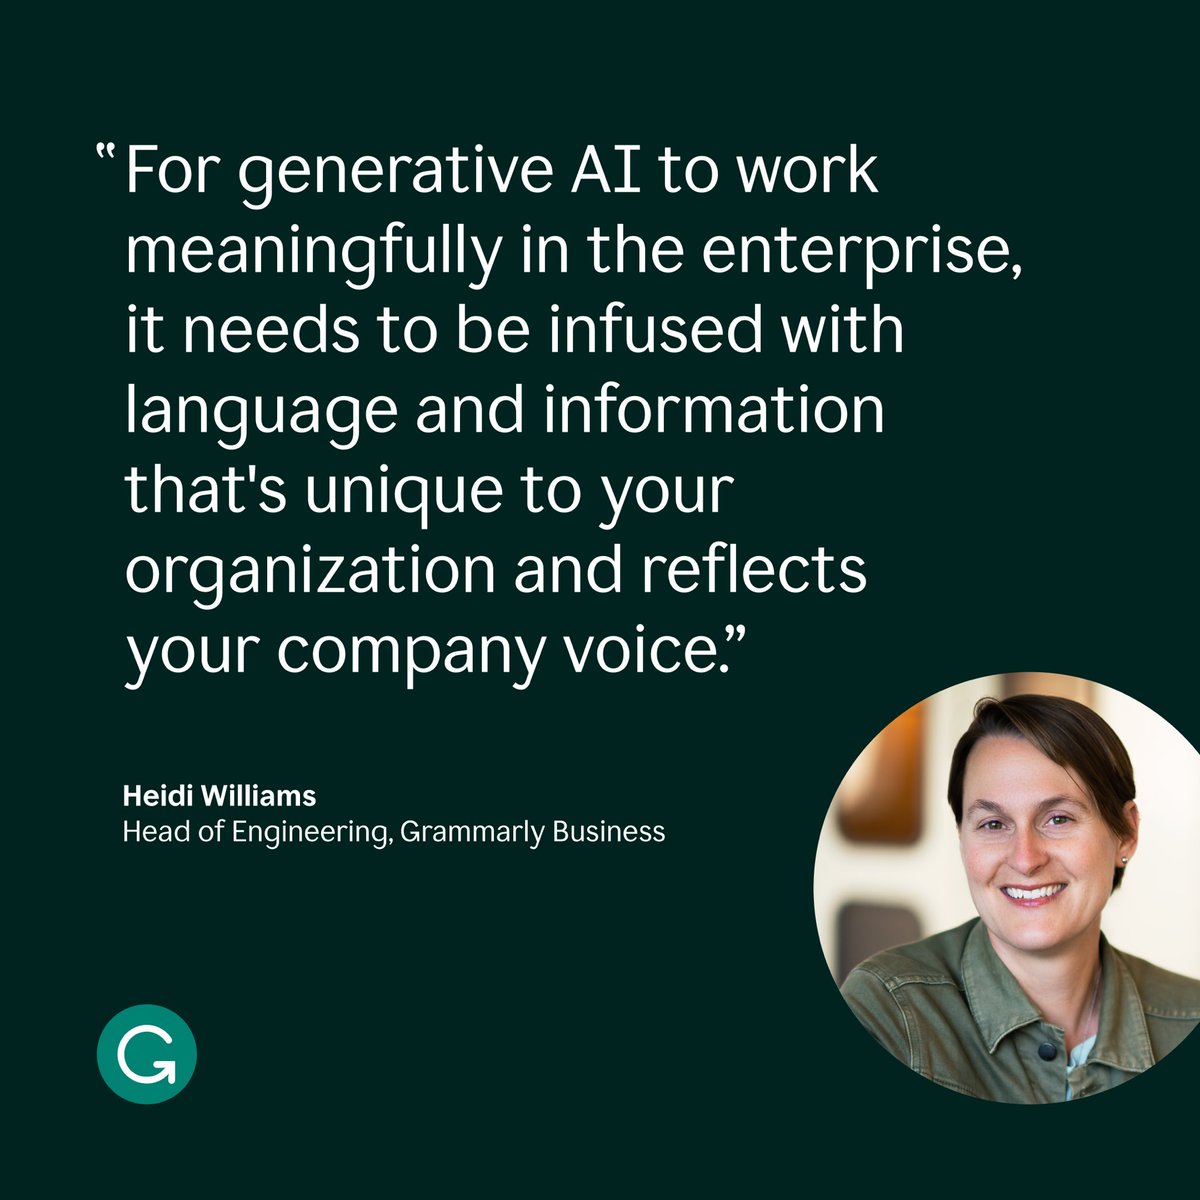 The @Grammarly Keynote happened a couple of weeks ago, and I'm still buzzing from Knowledge Share for Grammarly Business!

Check out the Grammarly Keynote: Empowering the AI-Connected Workplace on YouTube here: gram.ly/GKey23

#GrammarlyKeynote